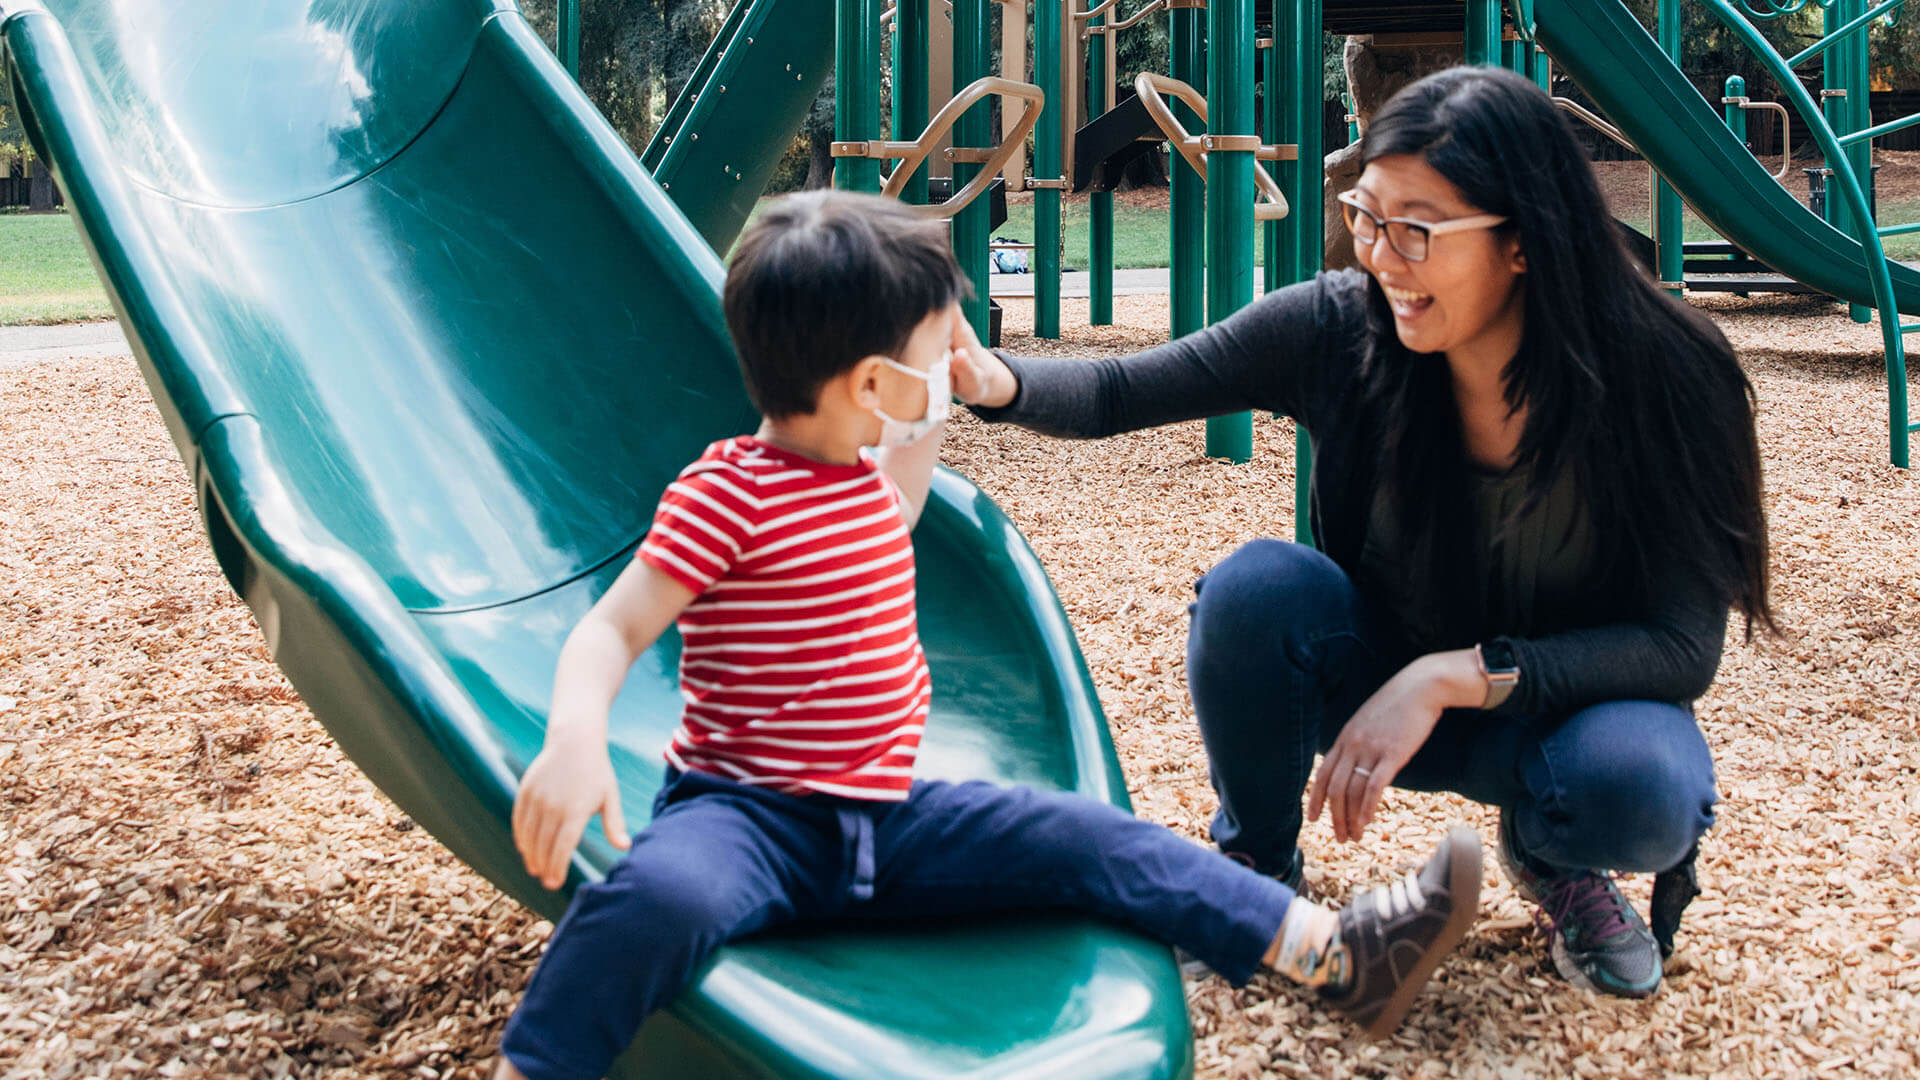 A boy wearing a mask sits at the bottom of a playground slide looking at his mother who is kneeling next to him with a smile.